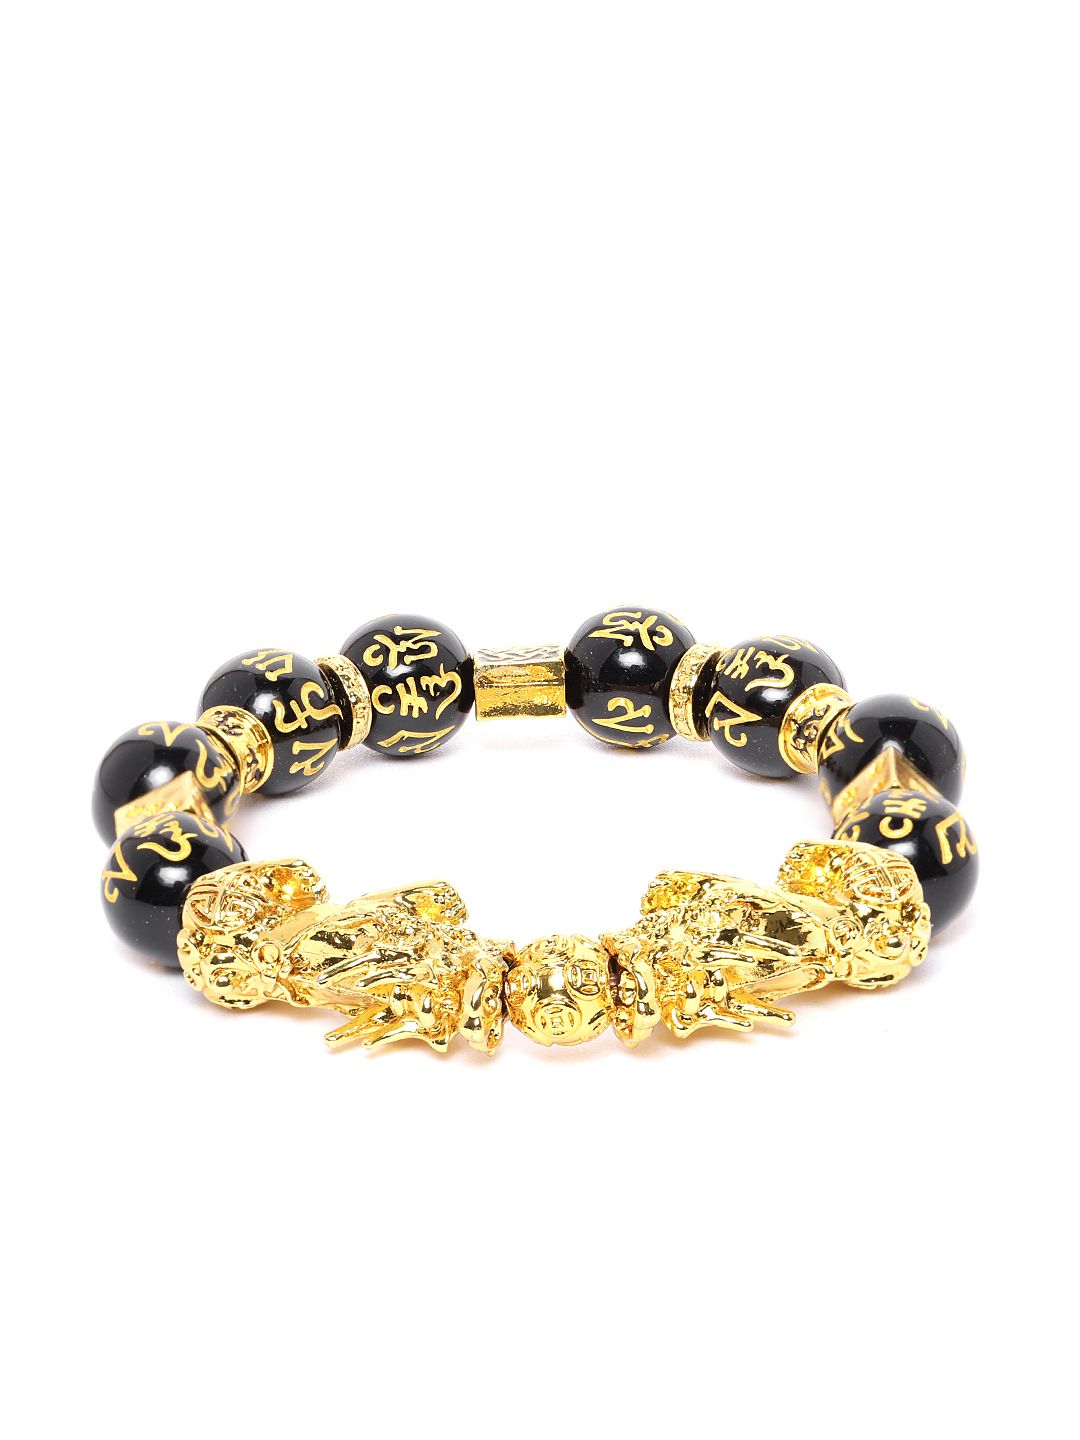 YouBella Black Gold-Plated Beaded Elasticated Dragon Shaped Bracelet Price in India